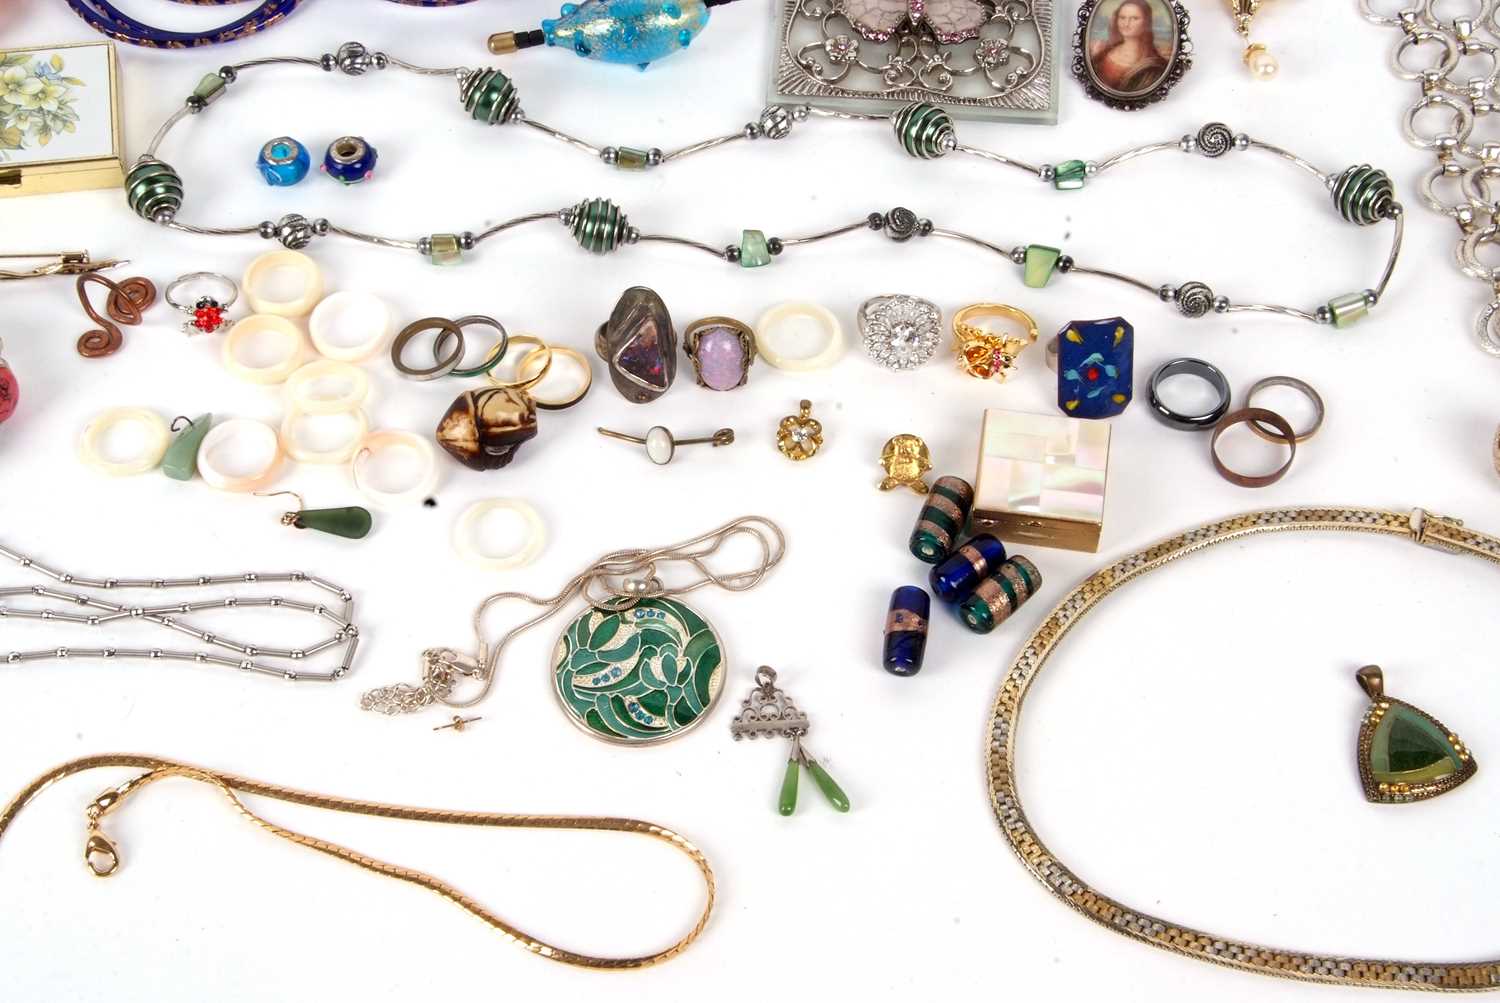 A quantity of assorted costume jewellery, to include bangles, brooches, beads, rings, chains, etc. - Image 8 of 9